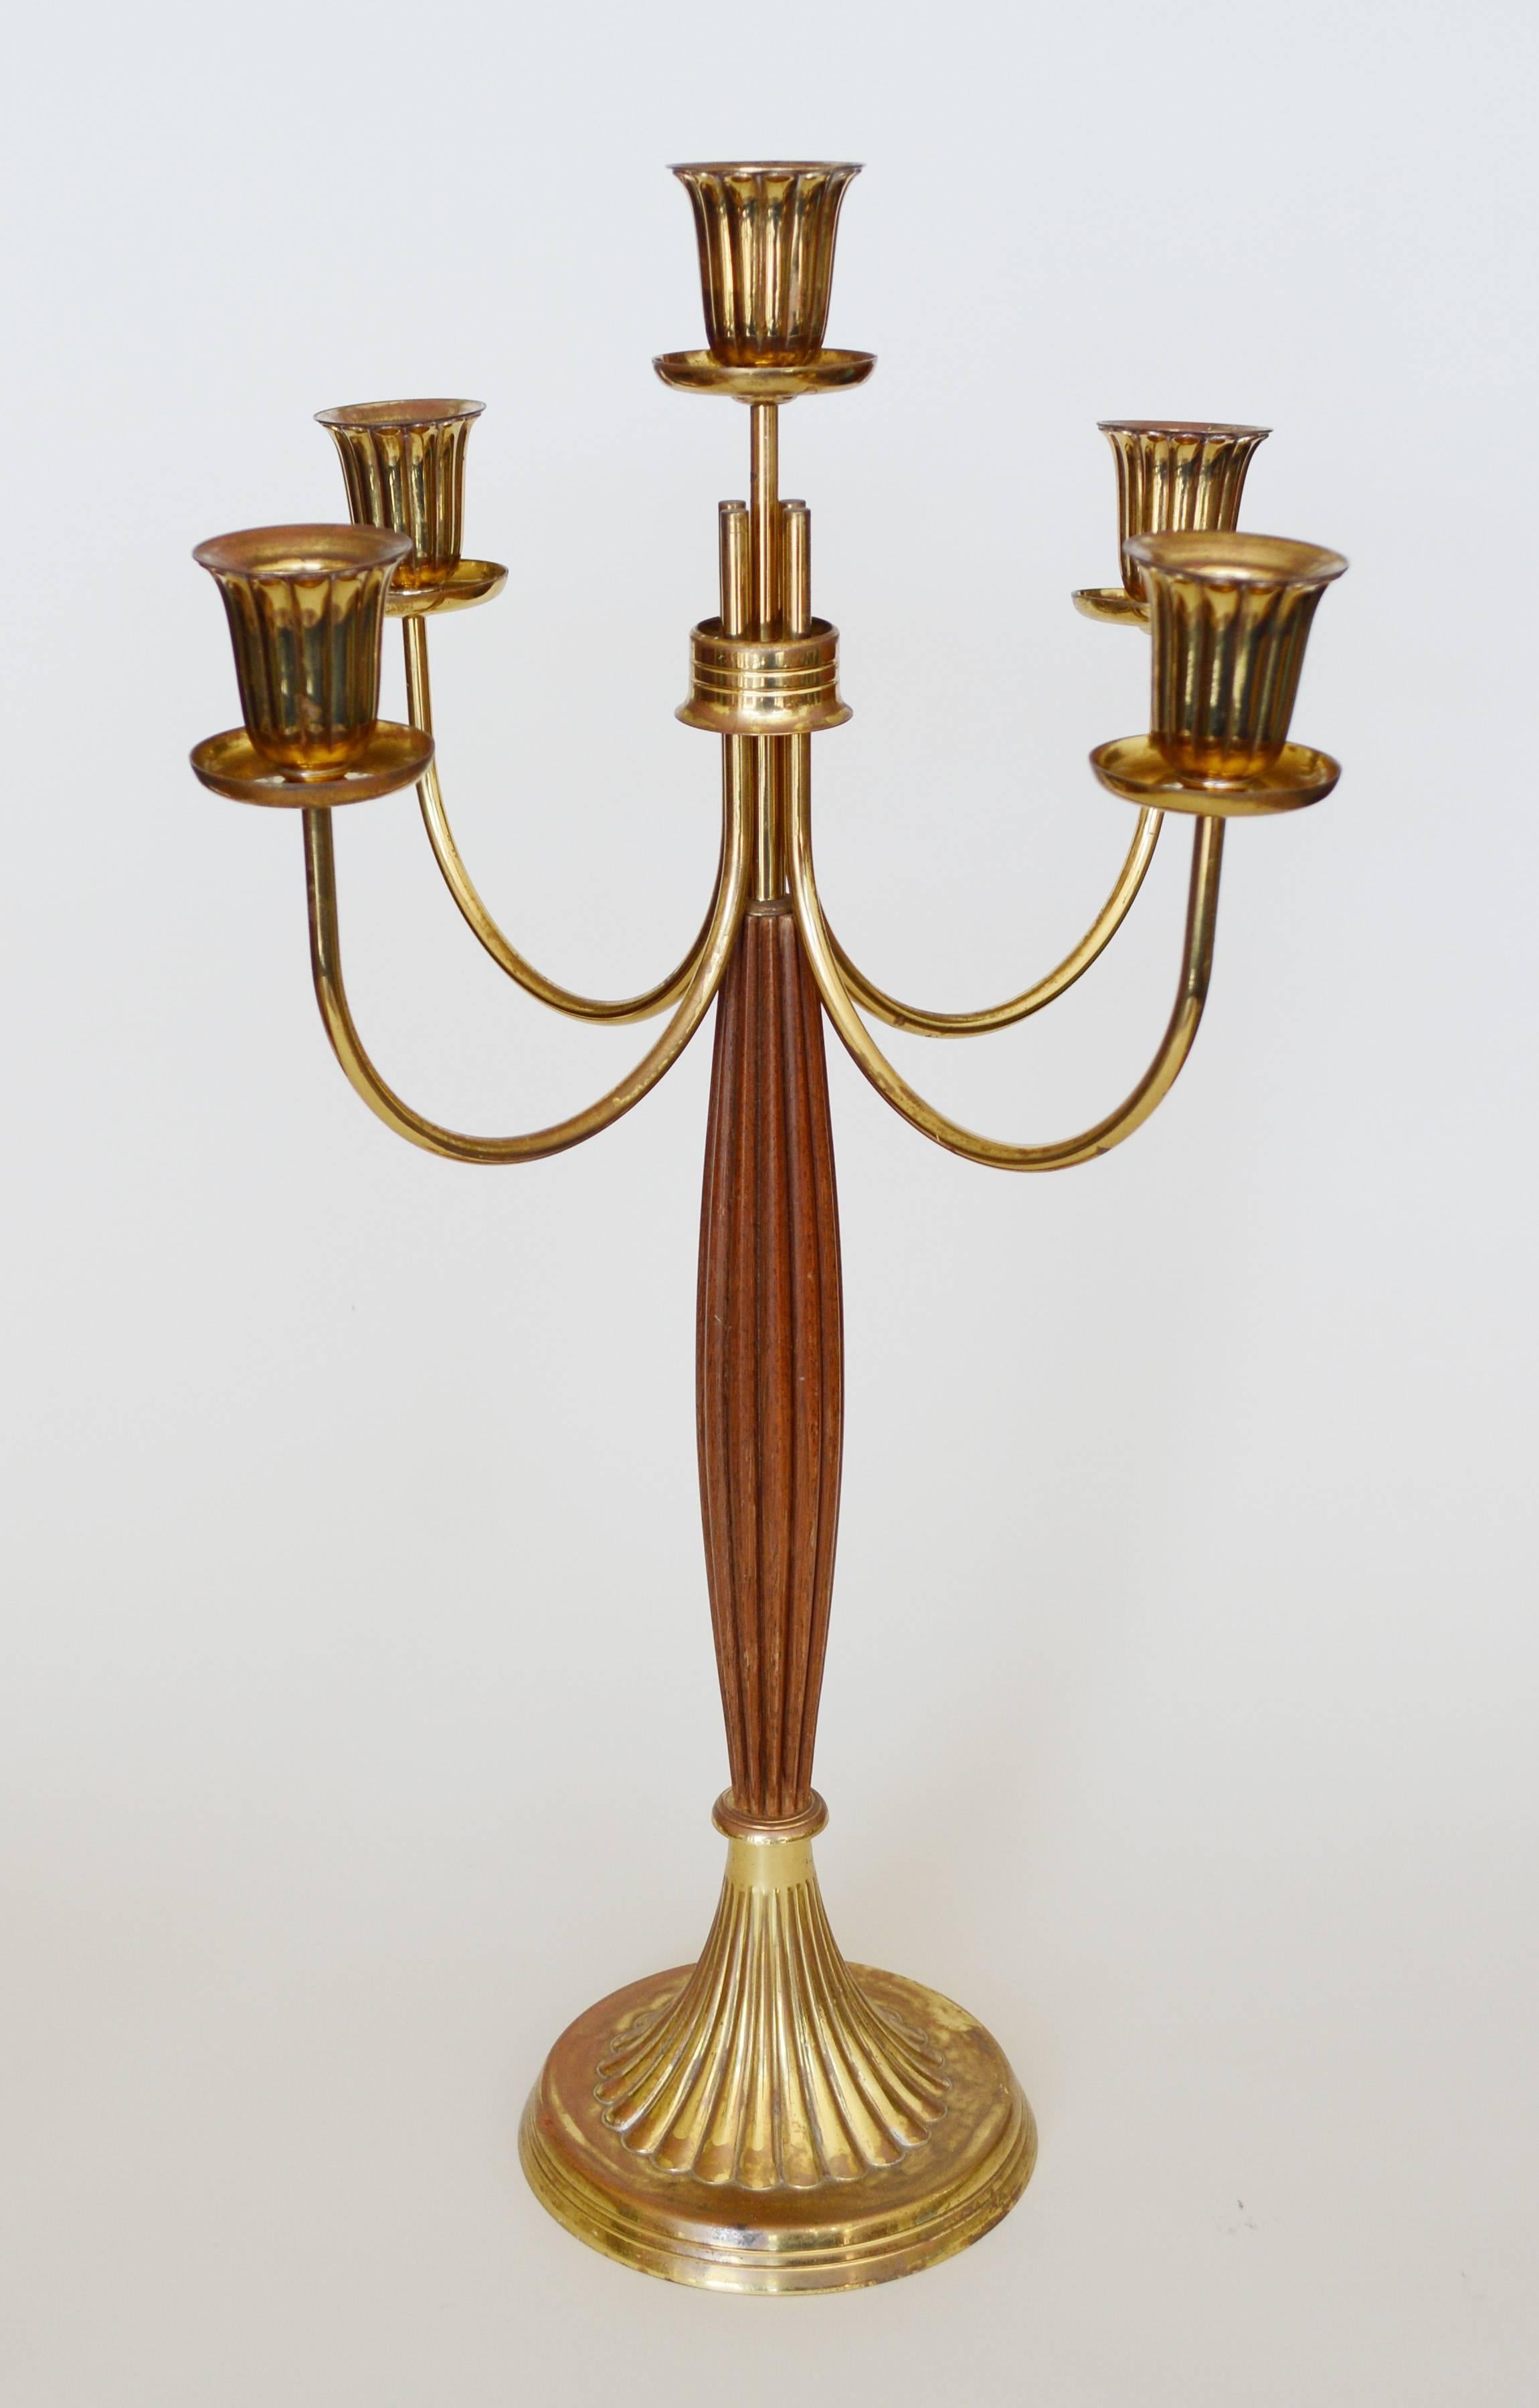 American Dorlyn Silversmith Candelabras Attributed to Tommi Parzinger